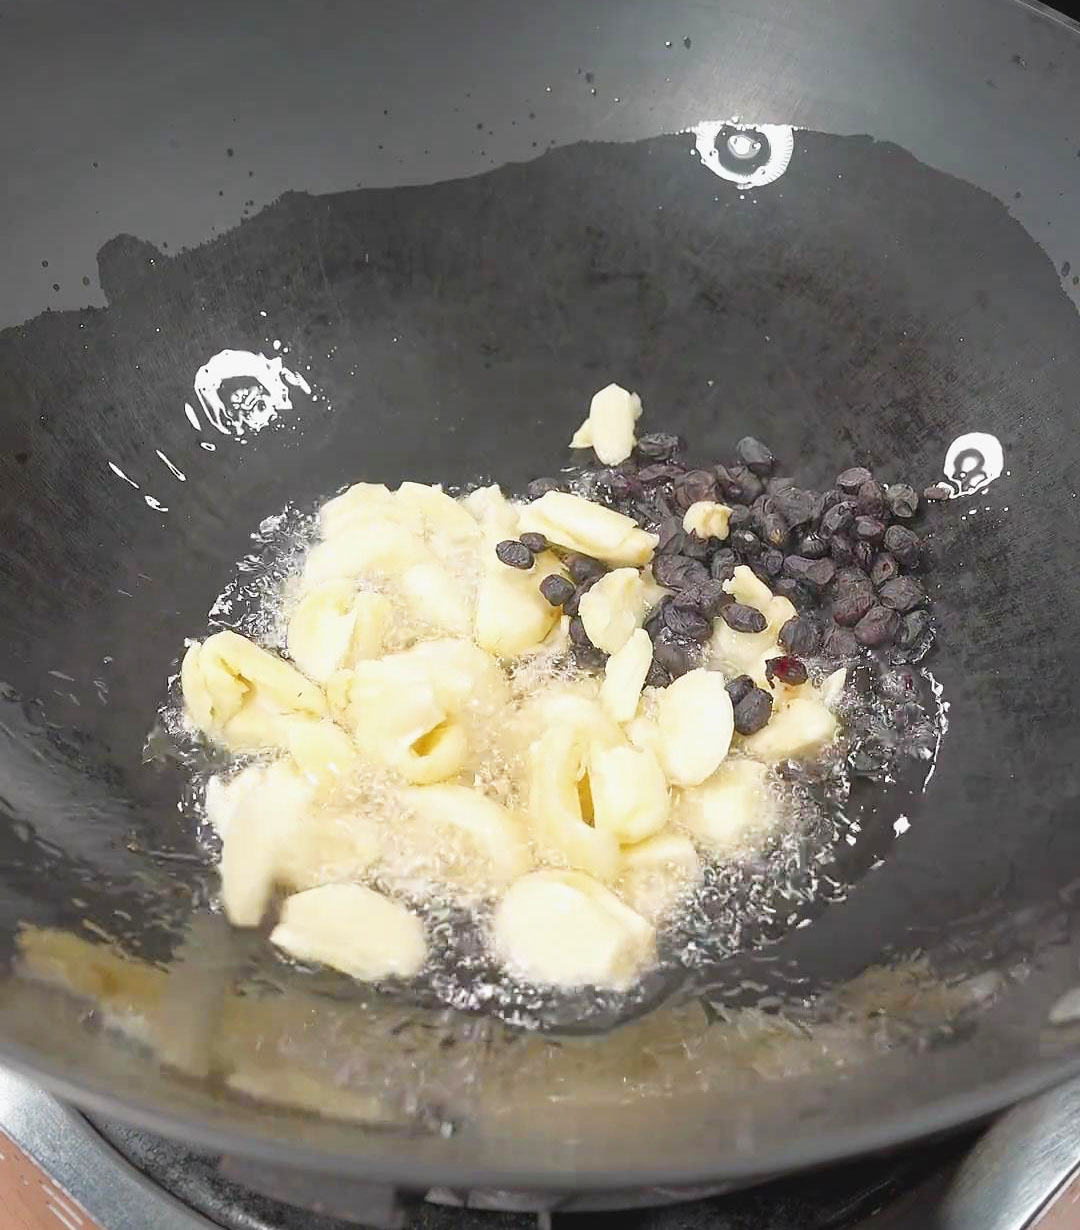 toss in garlic cloves and fermented black beans